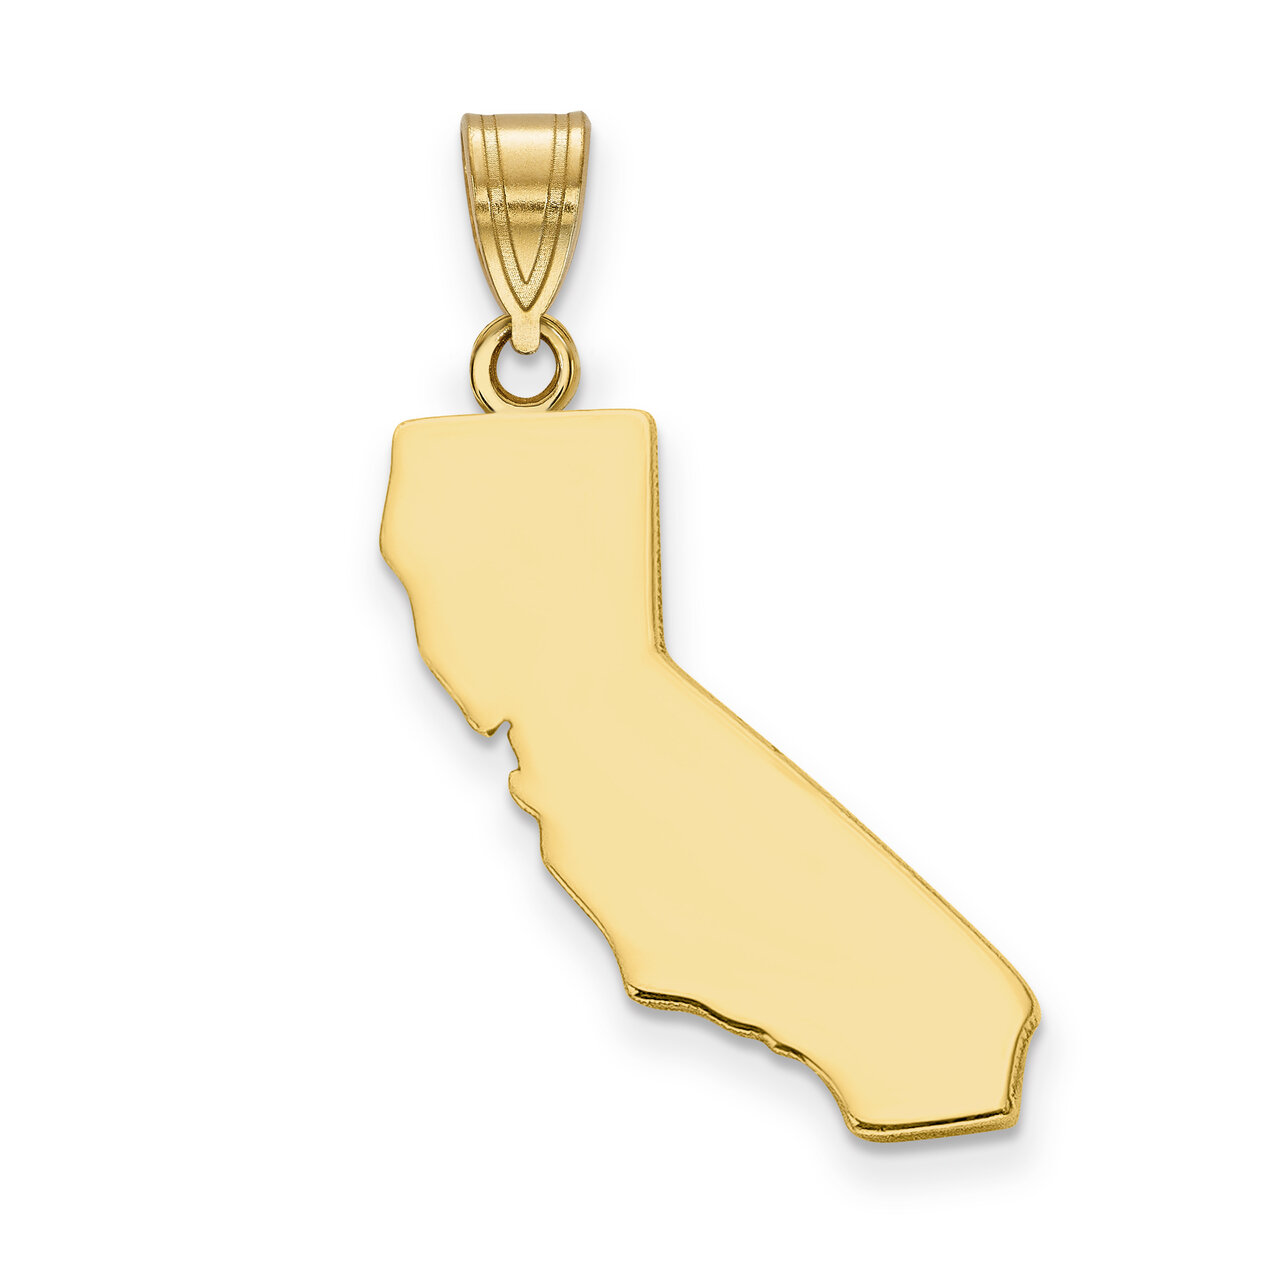 California State Pendant Charm Gold-plated on Silver Engravable XNA707GP-CA